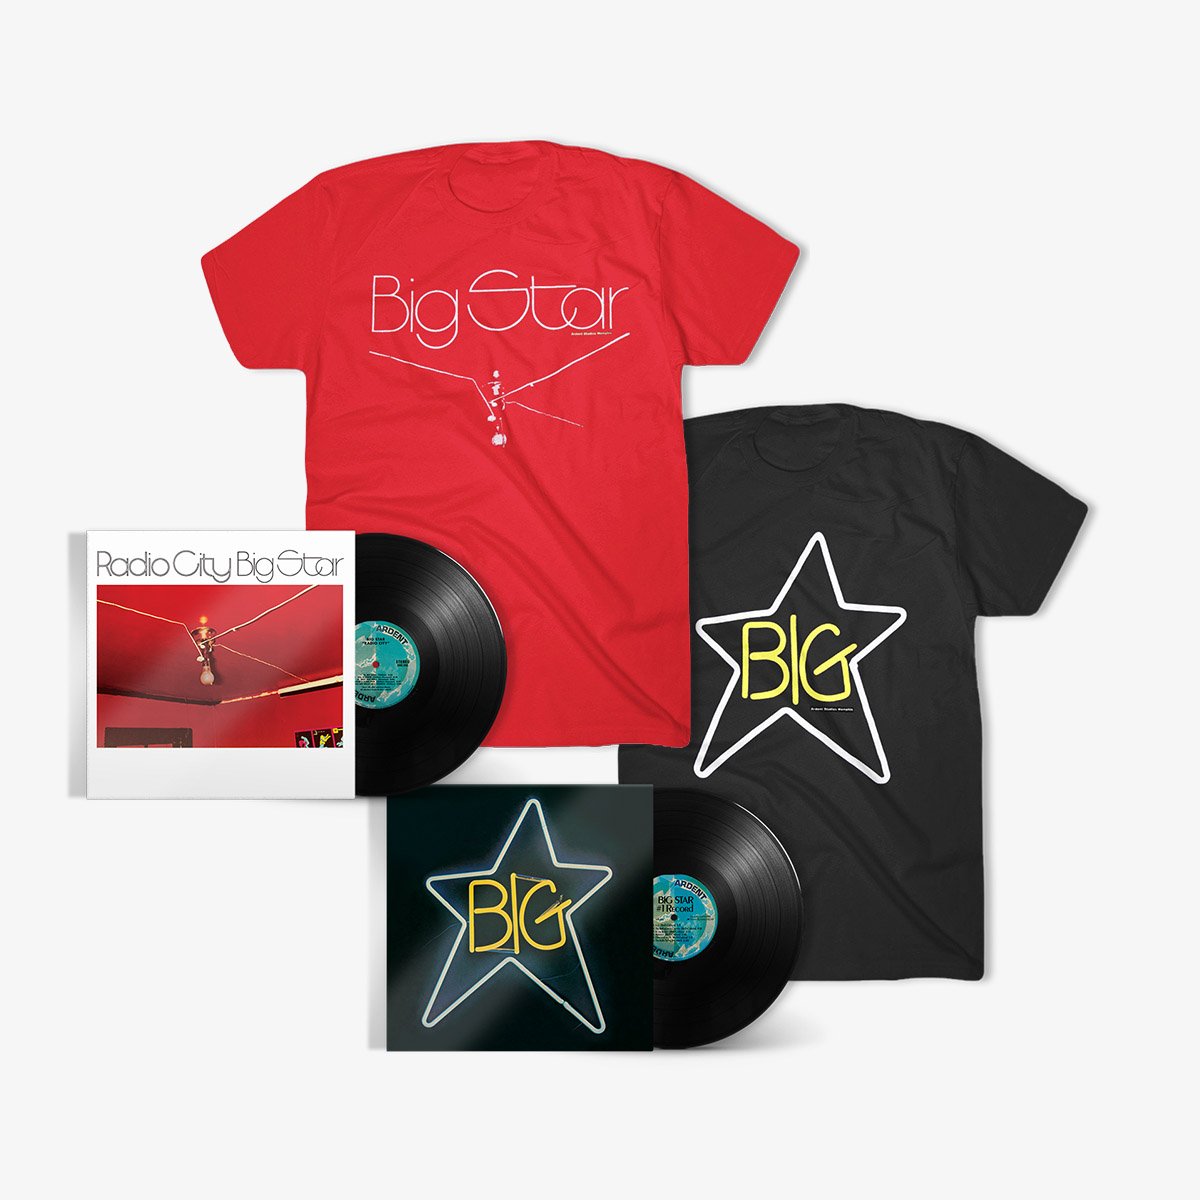 BIG STAR'S #1 RECORD AND RADIO CITY TO BE REISSUED ON 180-GRAM